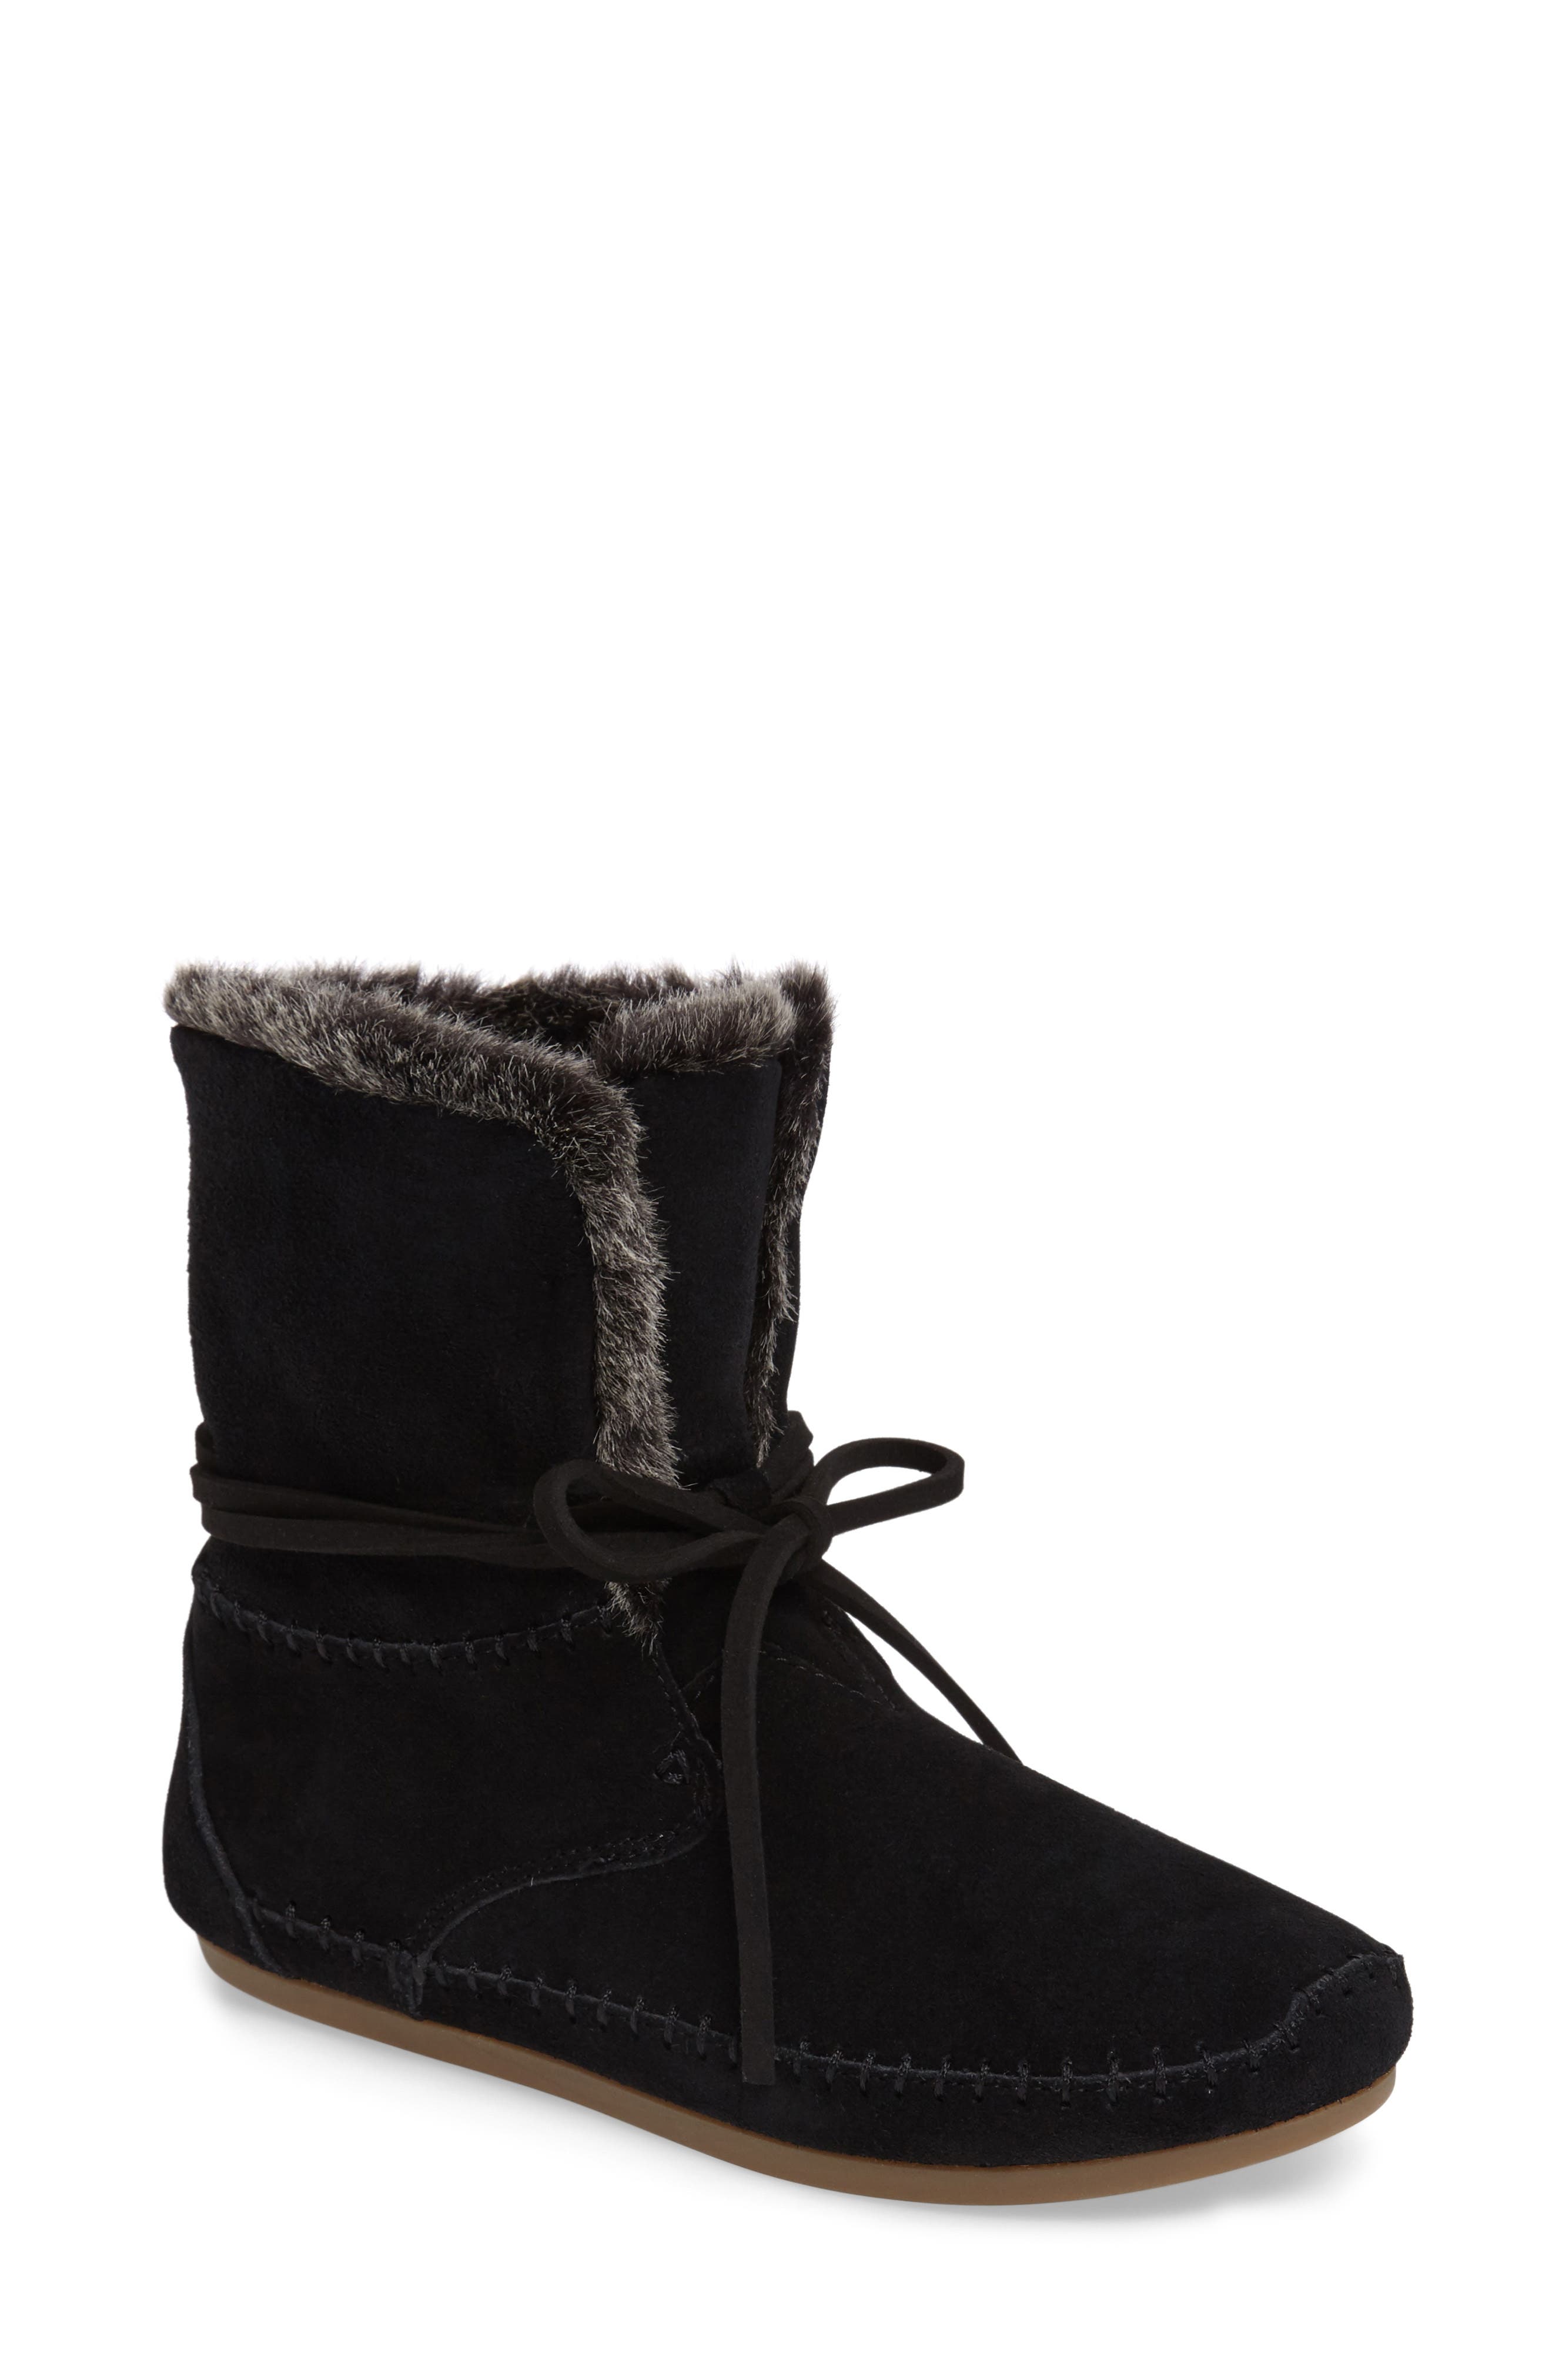 TOMS 'Zahara' Suede Bootie with Faux 